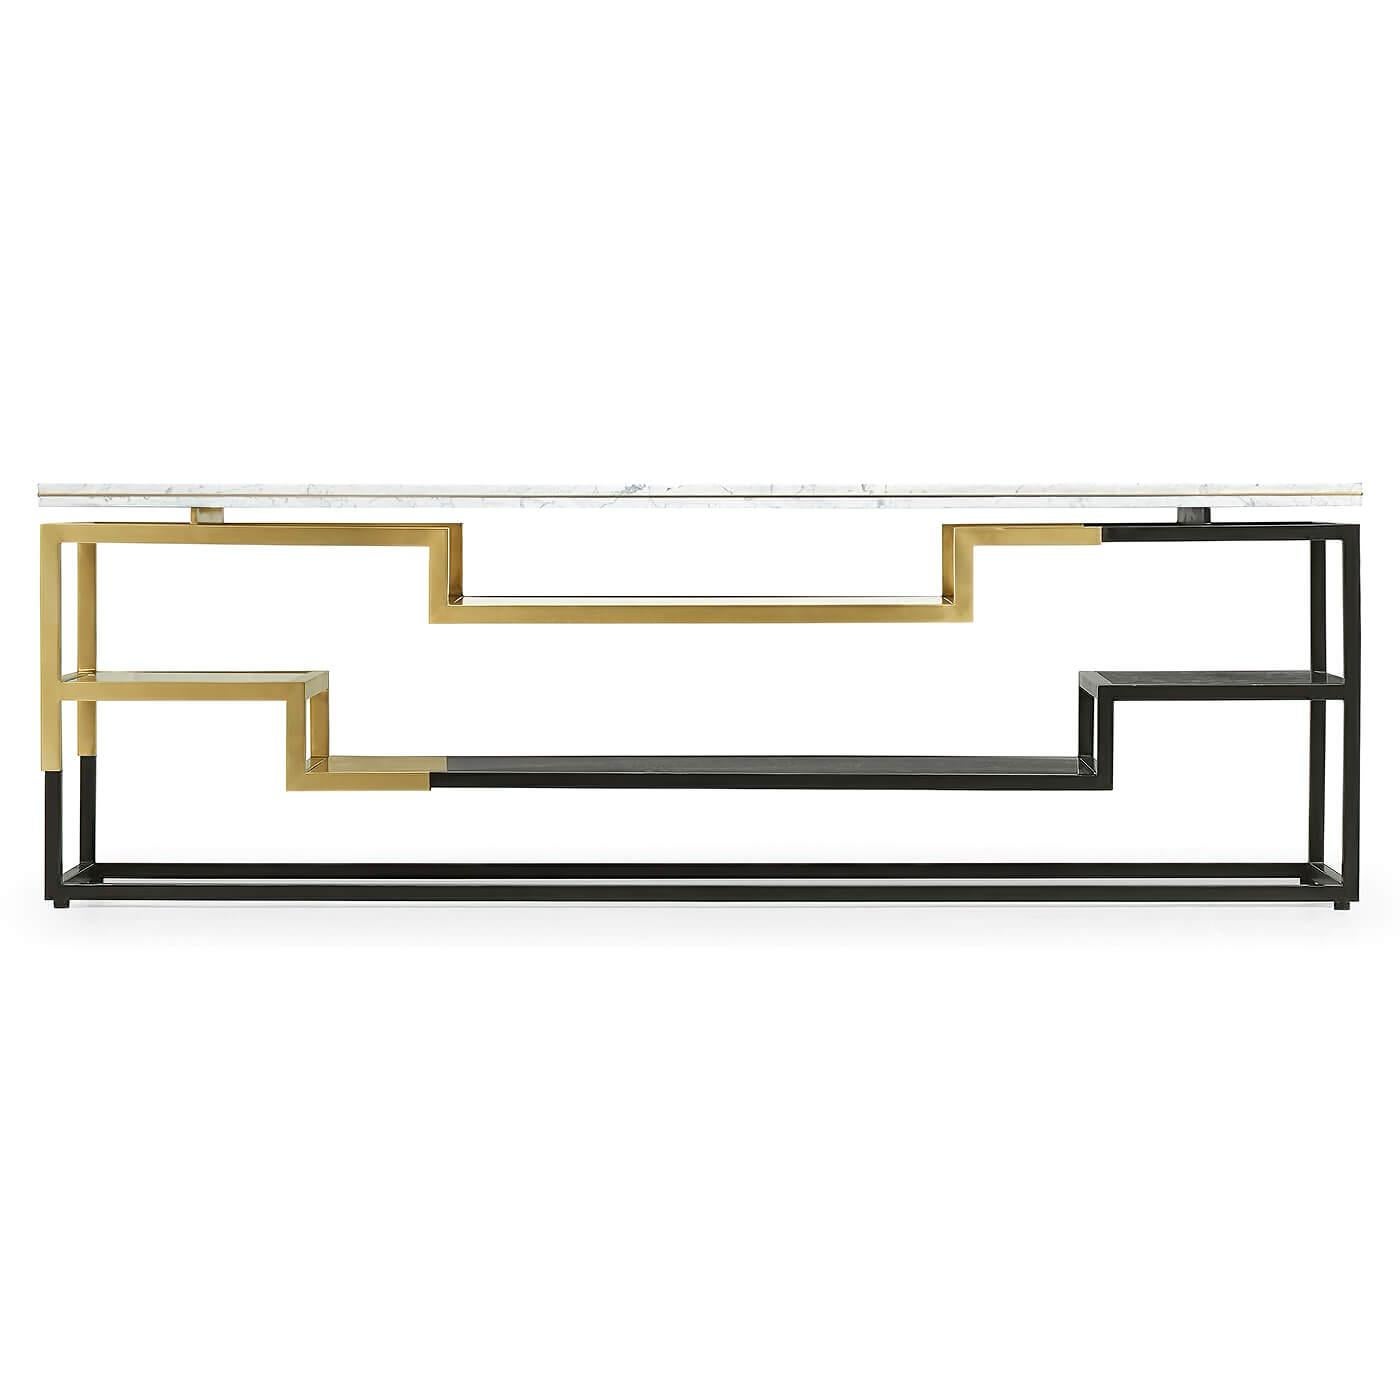 A Mid-Century Modern style marble and brass long console table. The frame is fabricated from brass with contrasting sleeves. The top features Calacatta marble from northern Tuscany with a supported glass lower shelf.

Dimensions: 80